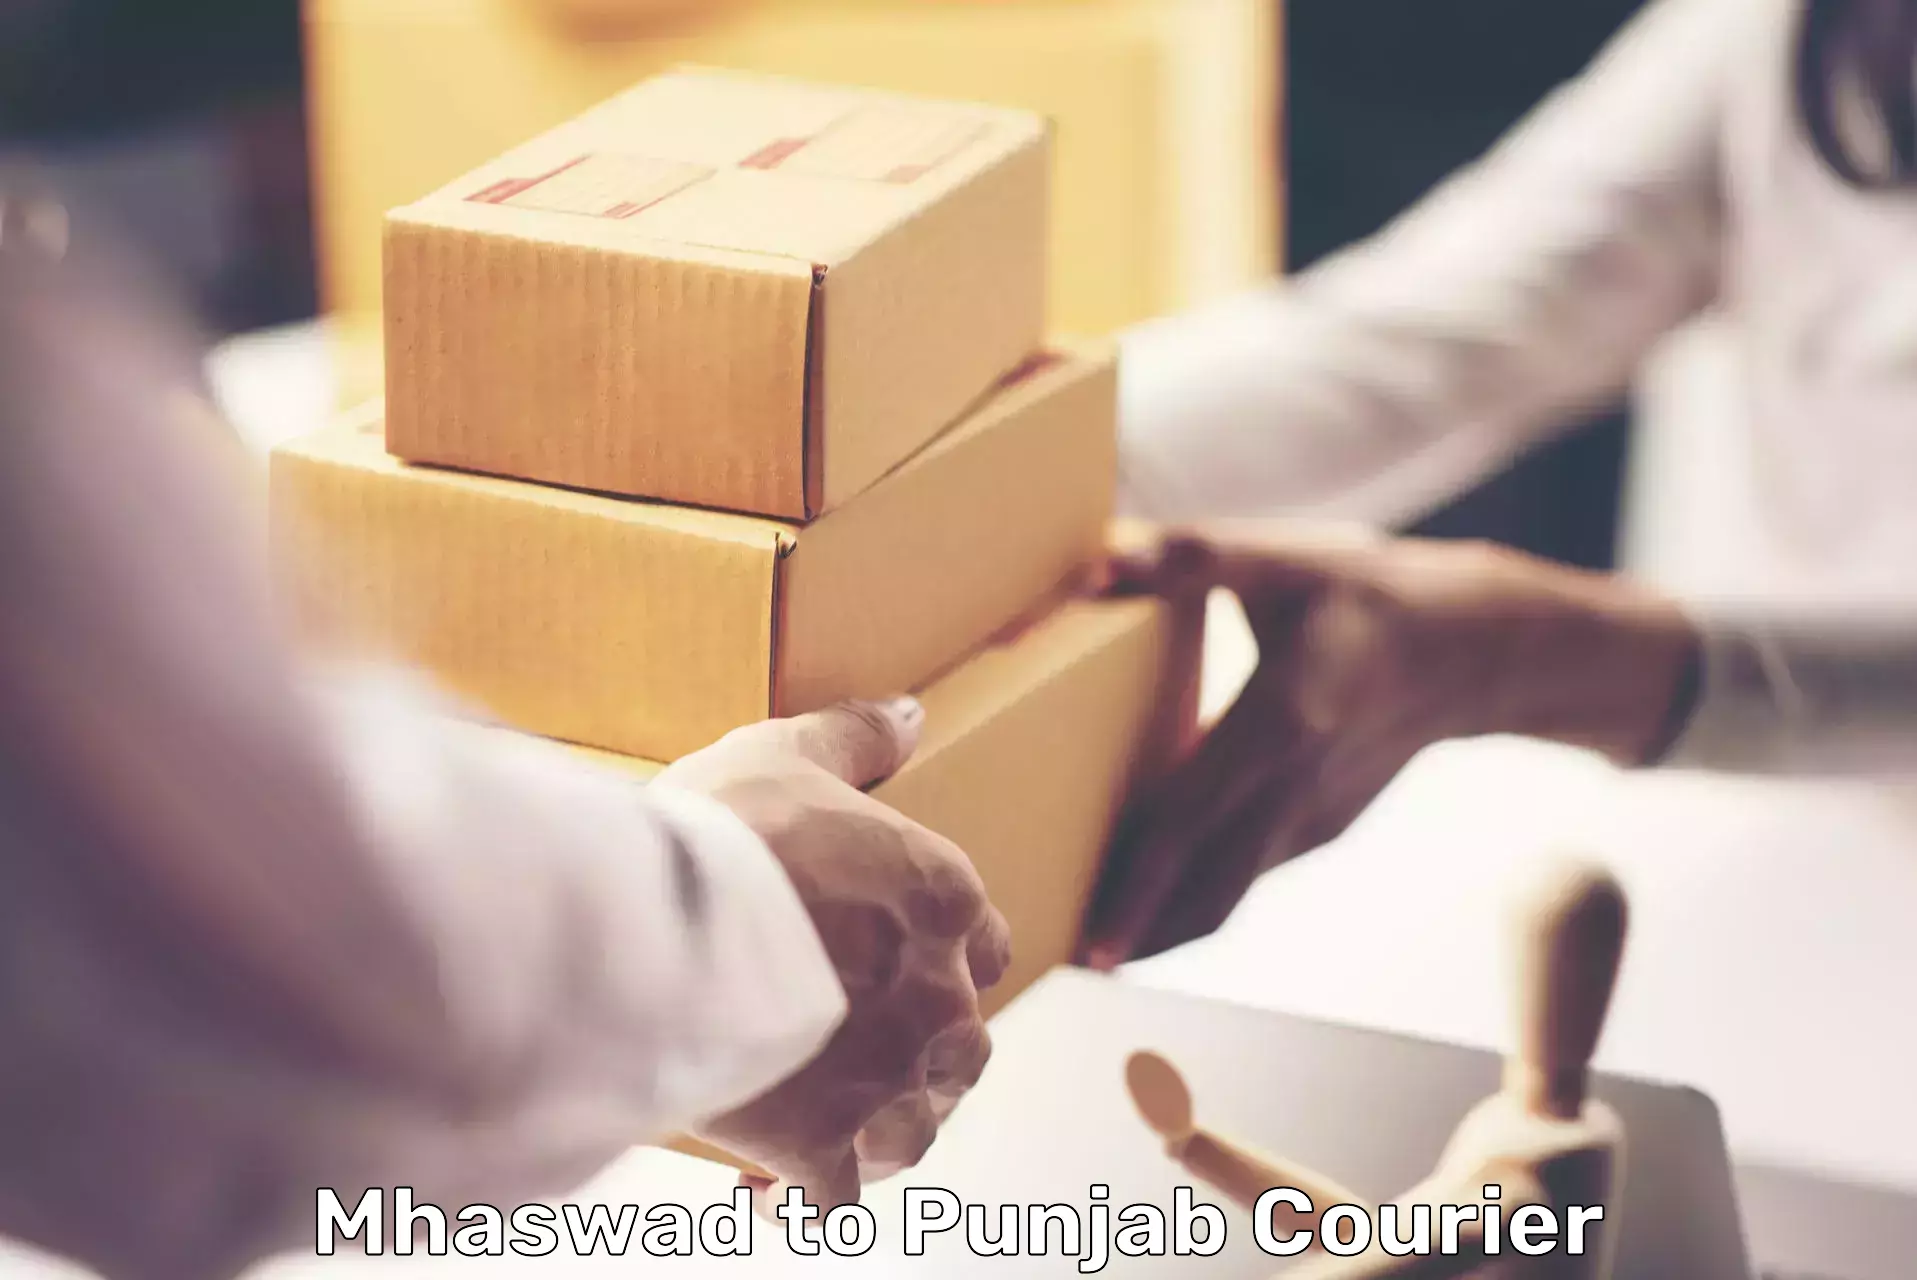 Global courier networks Mhaswad to Amritsar